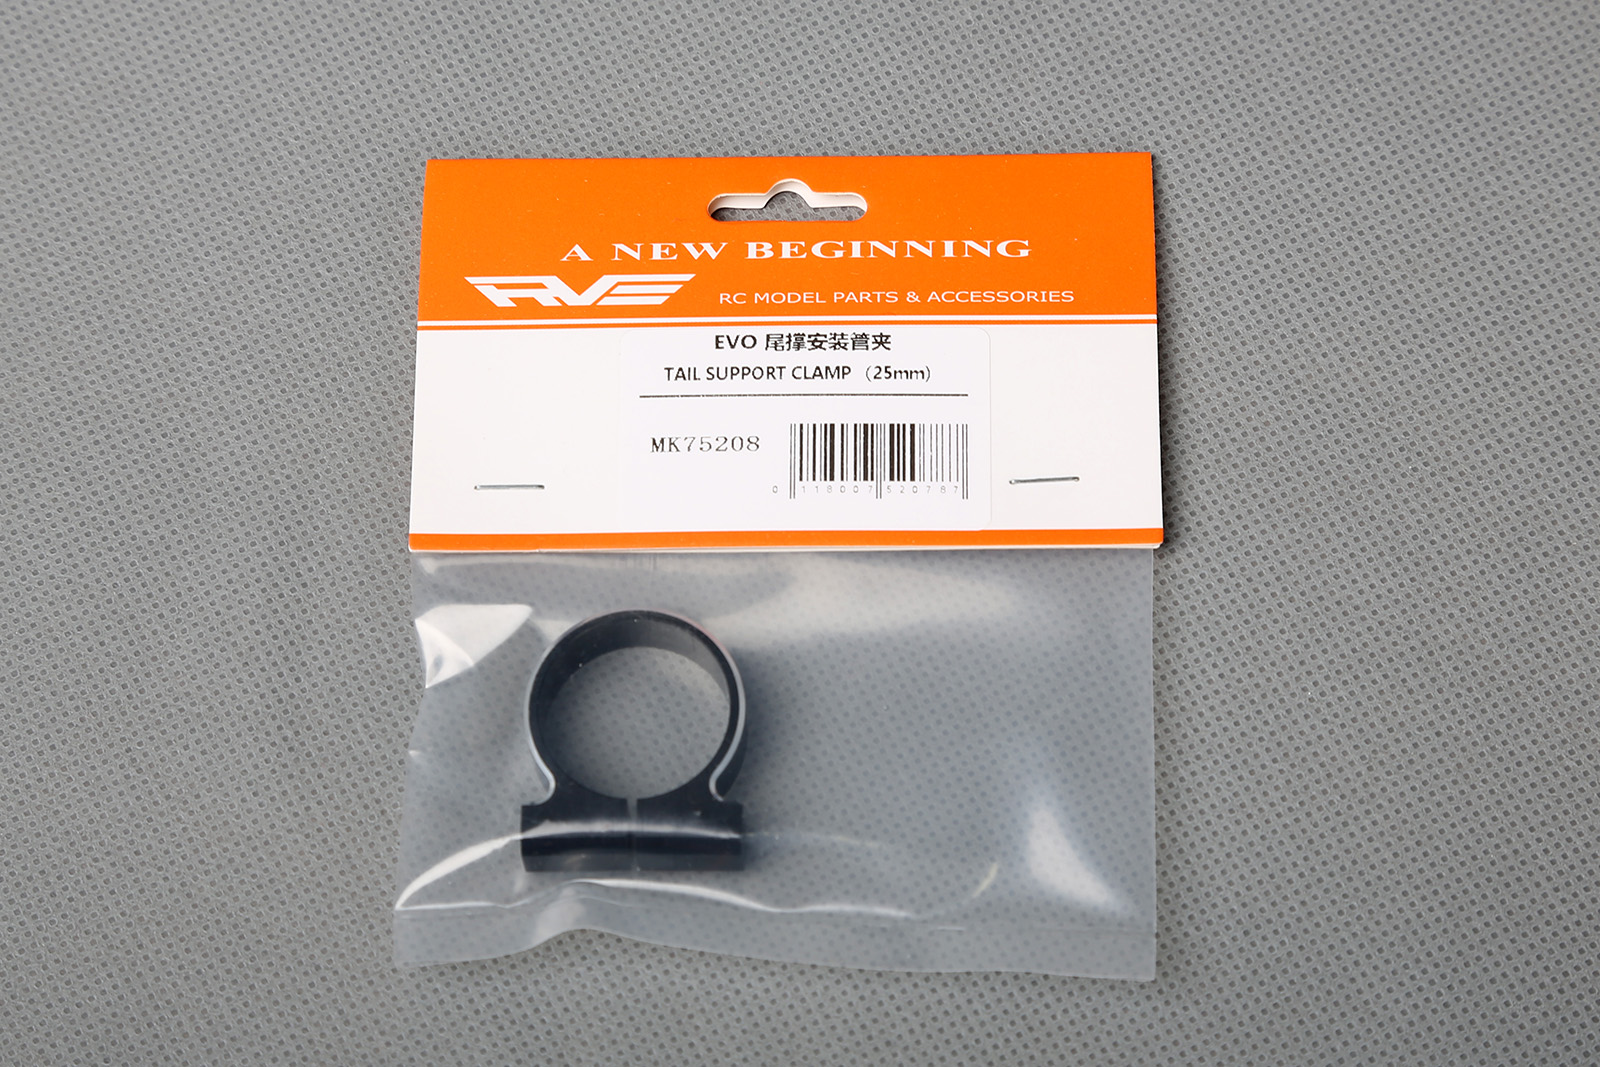 TAIL SUPPORT CLAMP （25mm）(图1)